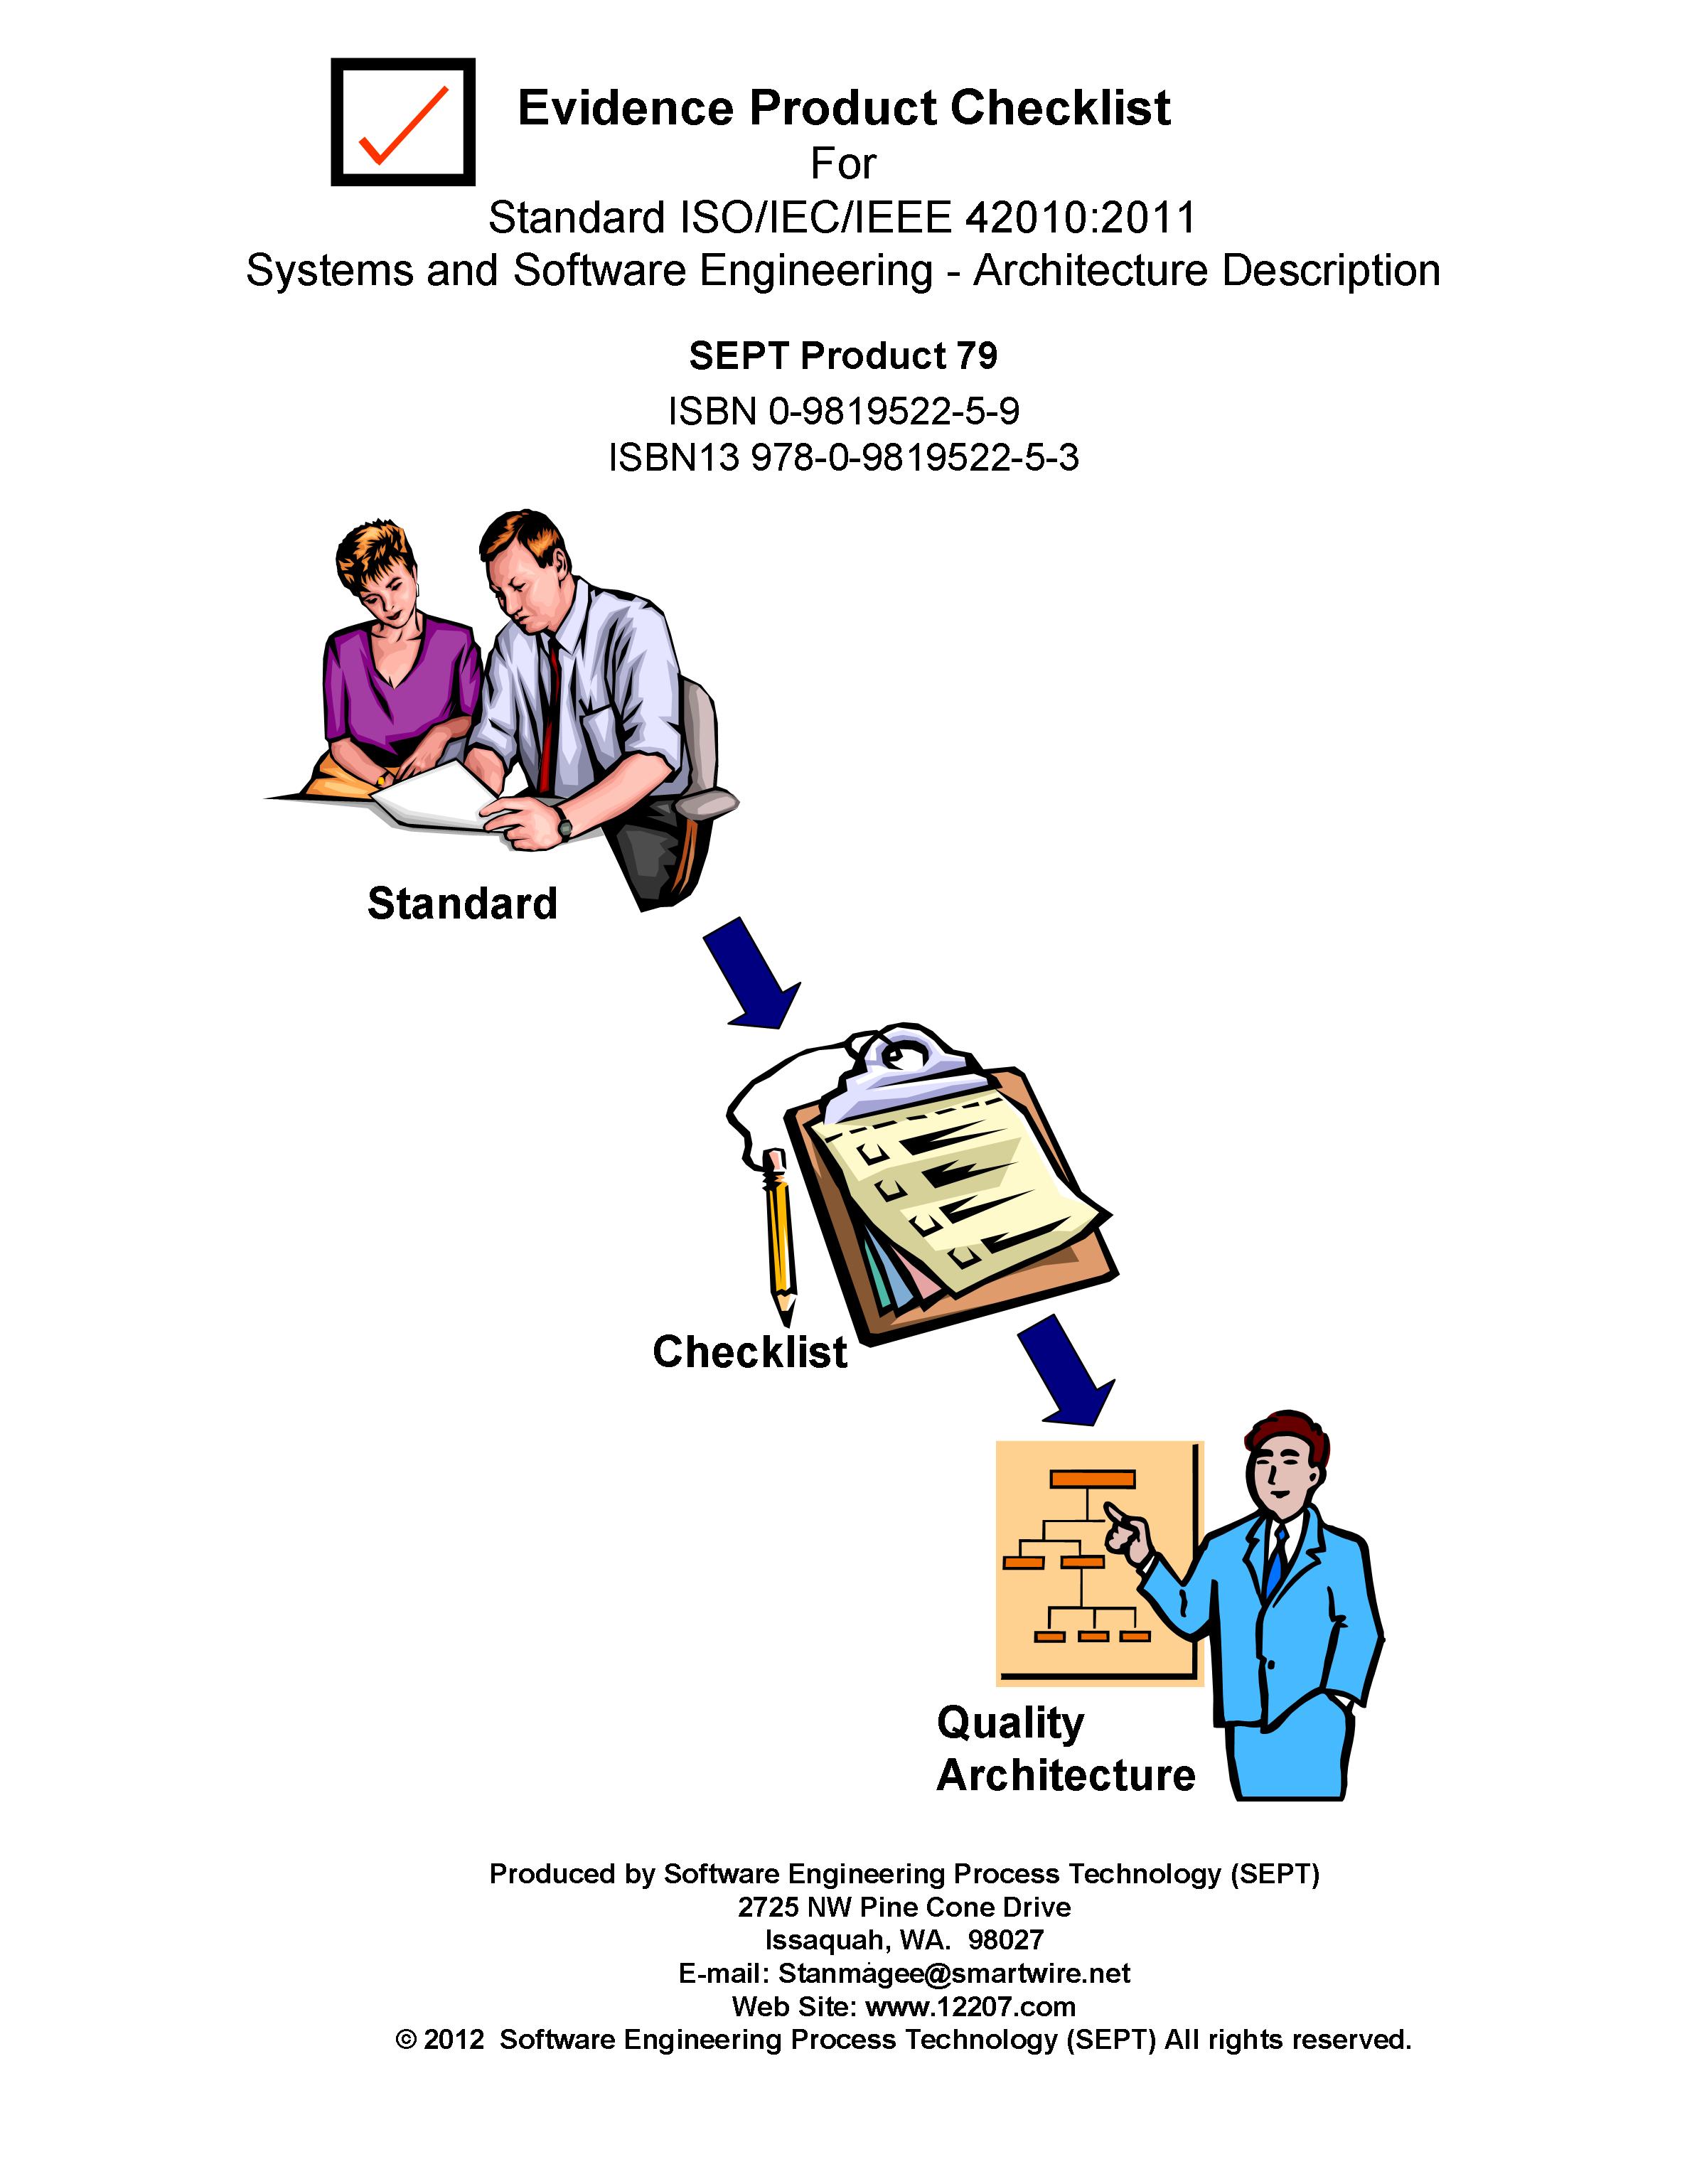 ISO/IEC 42010:2011 Systems and Software Engineering - Architecture Description